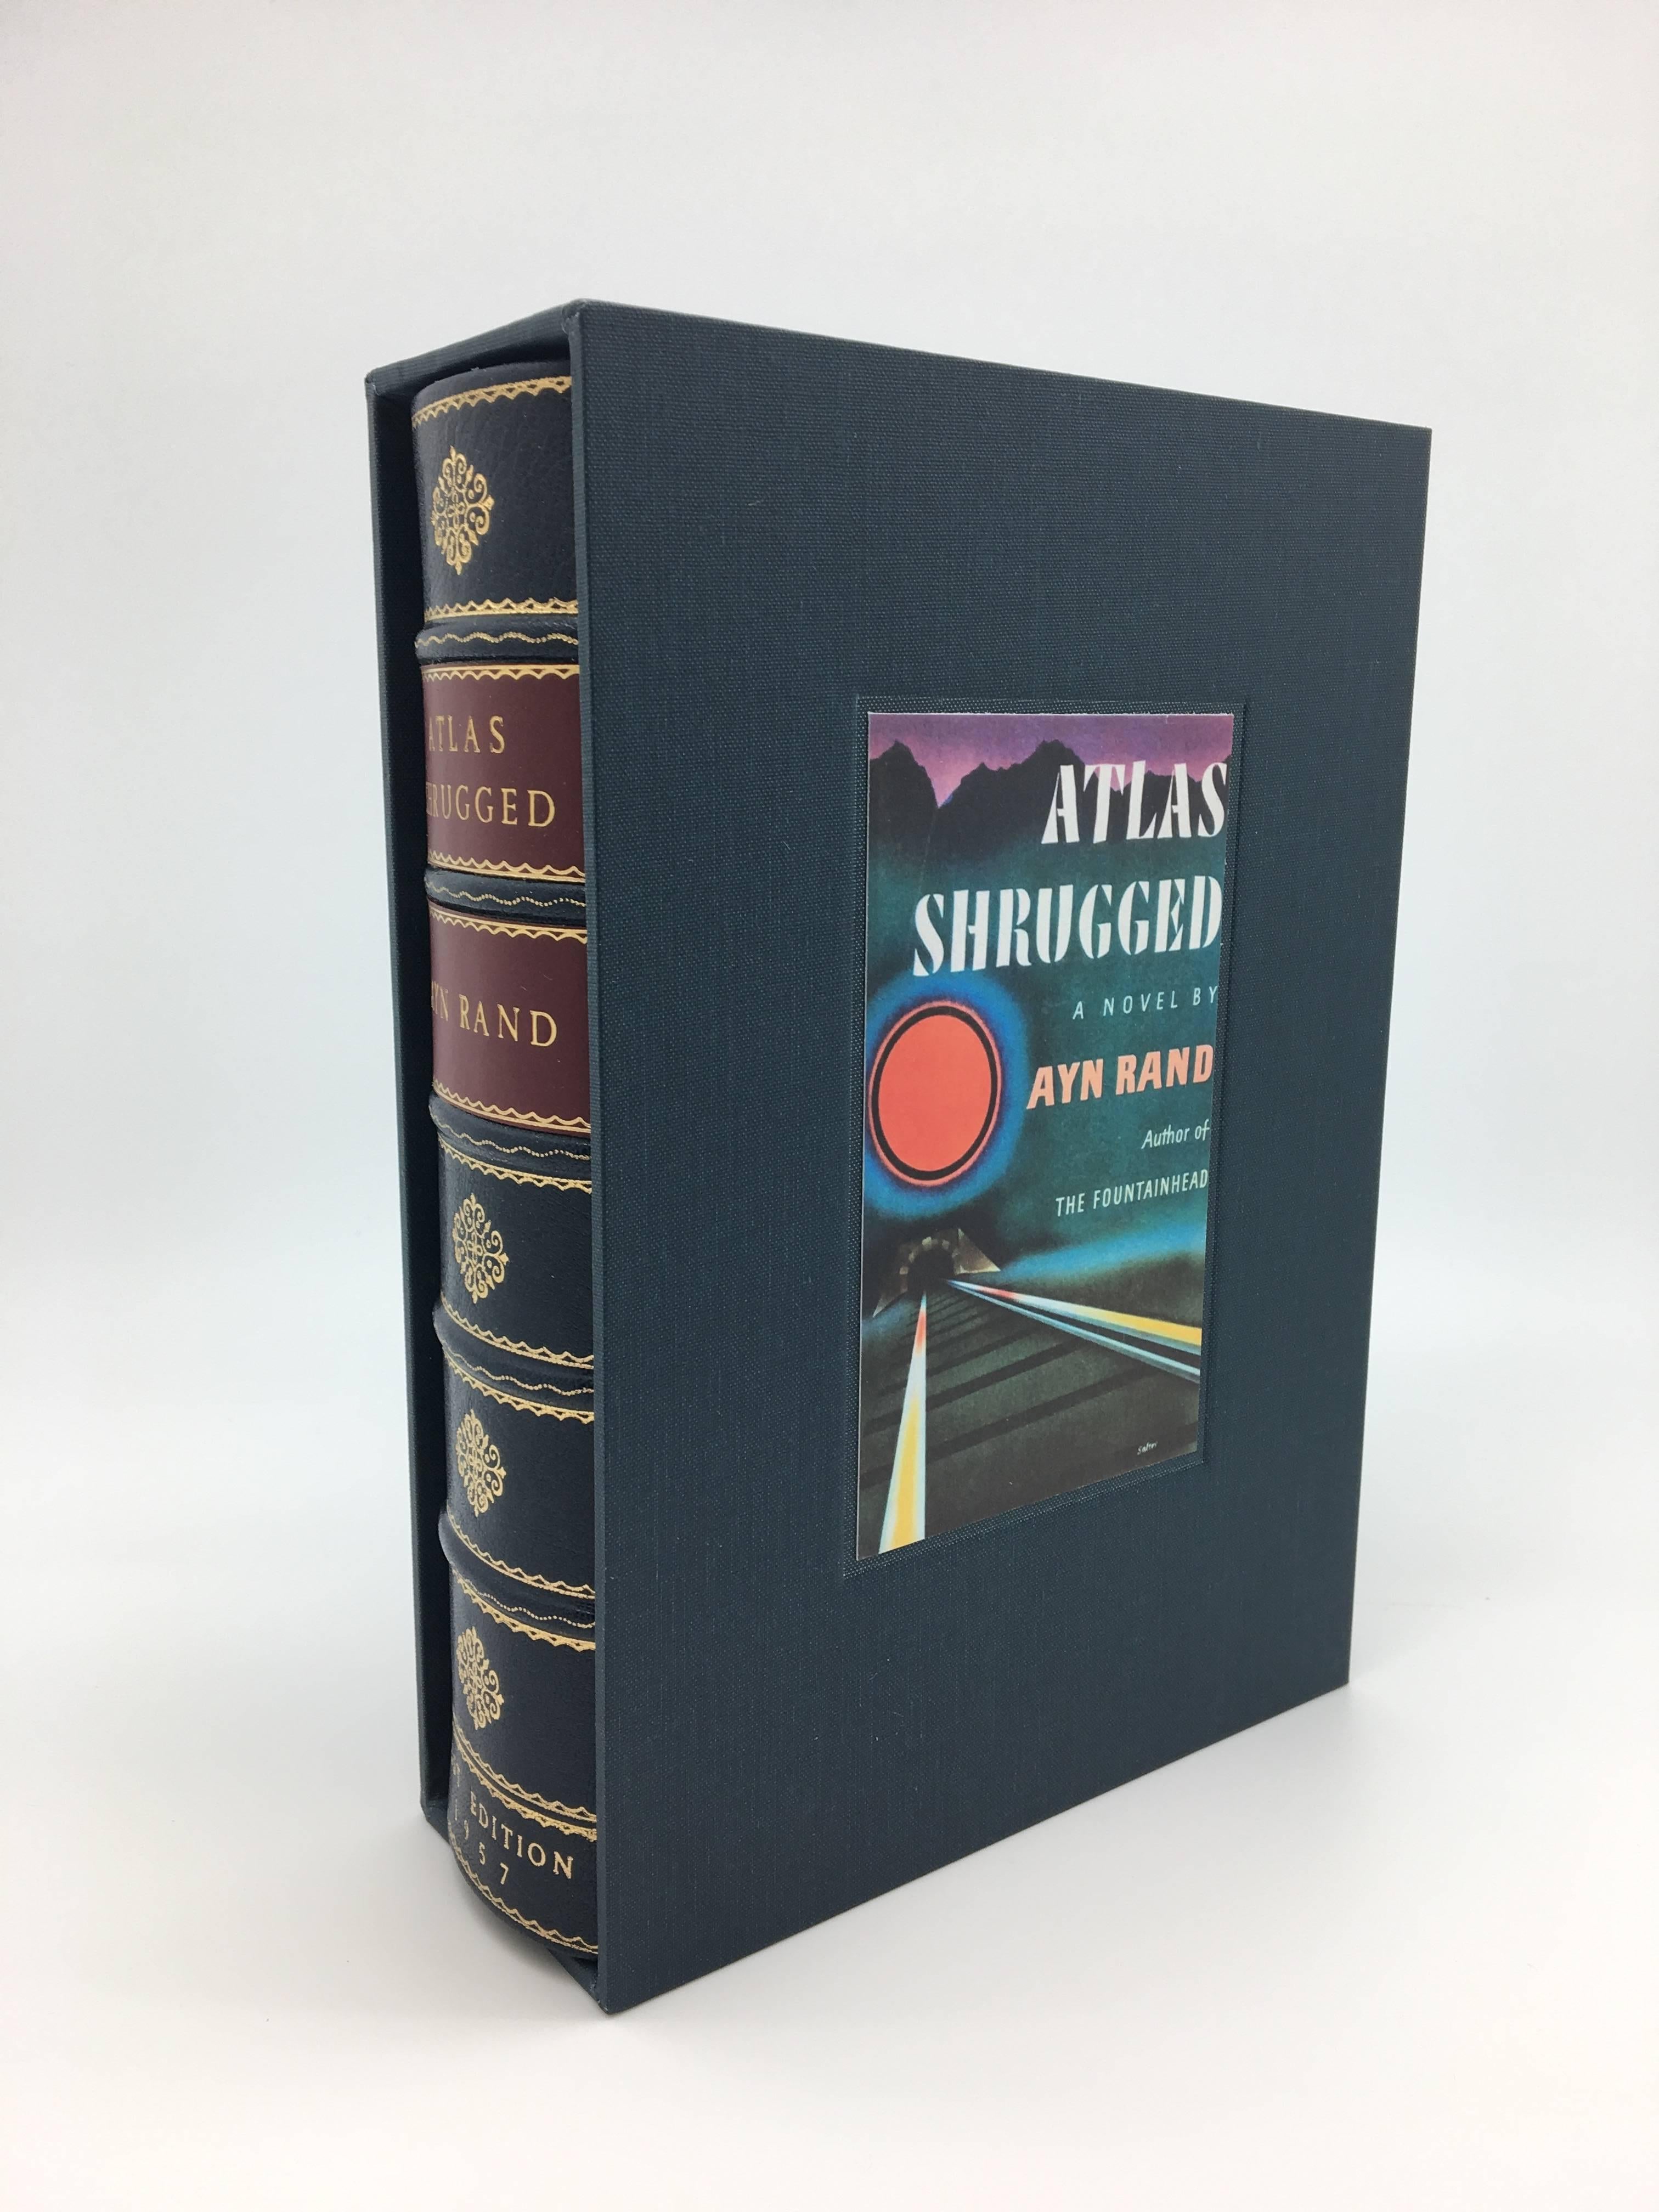 First edition, first impression of one of litertaure's most popular and influential novels of the 20th century. Bound in full blue morocco leather with raised bands and gilt on spine and boards. Striking presentation and housed in a matching cloth